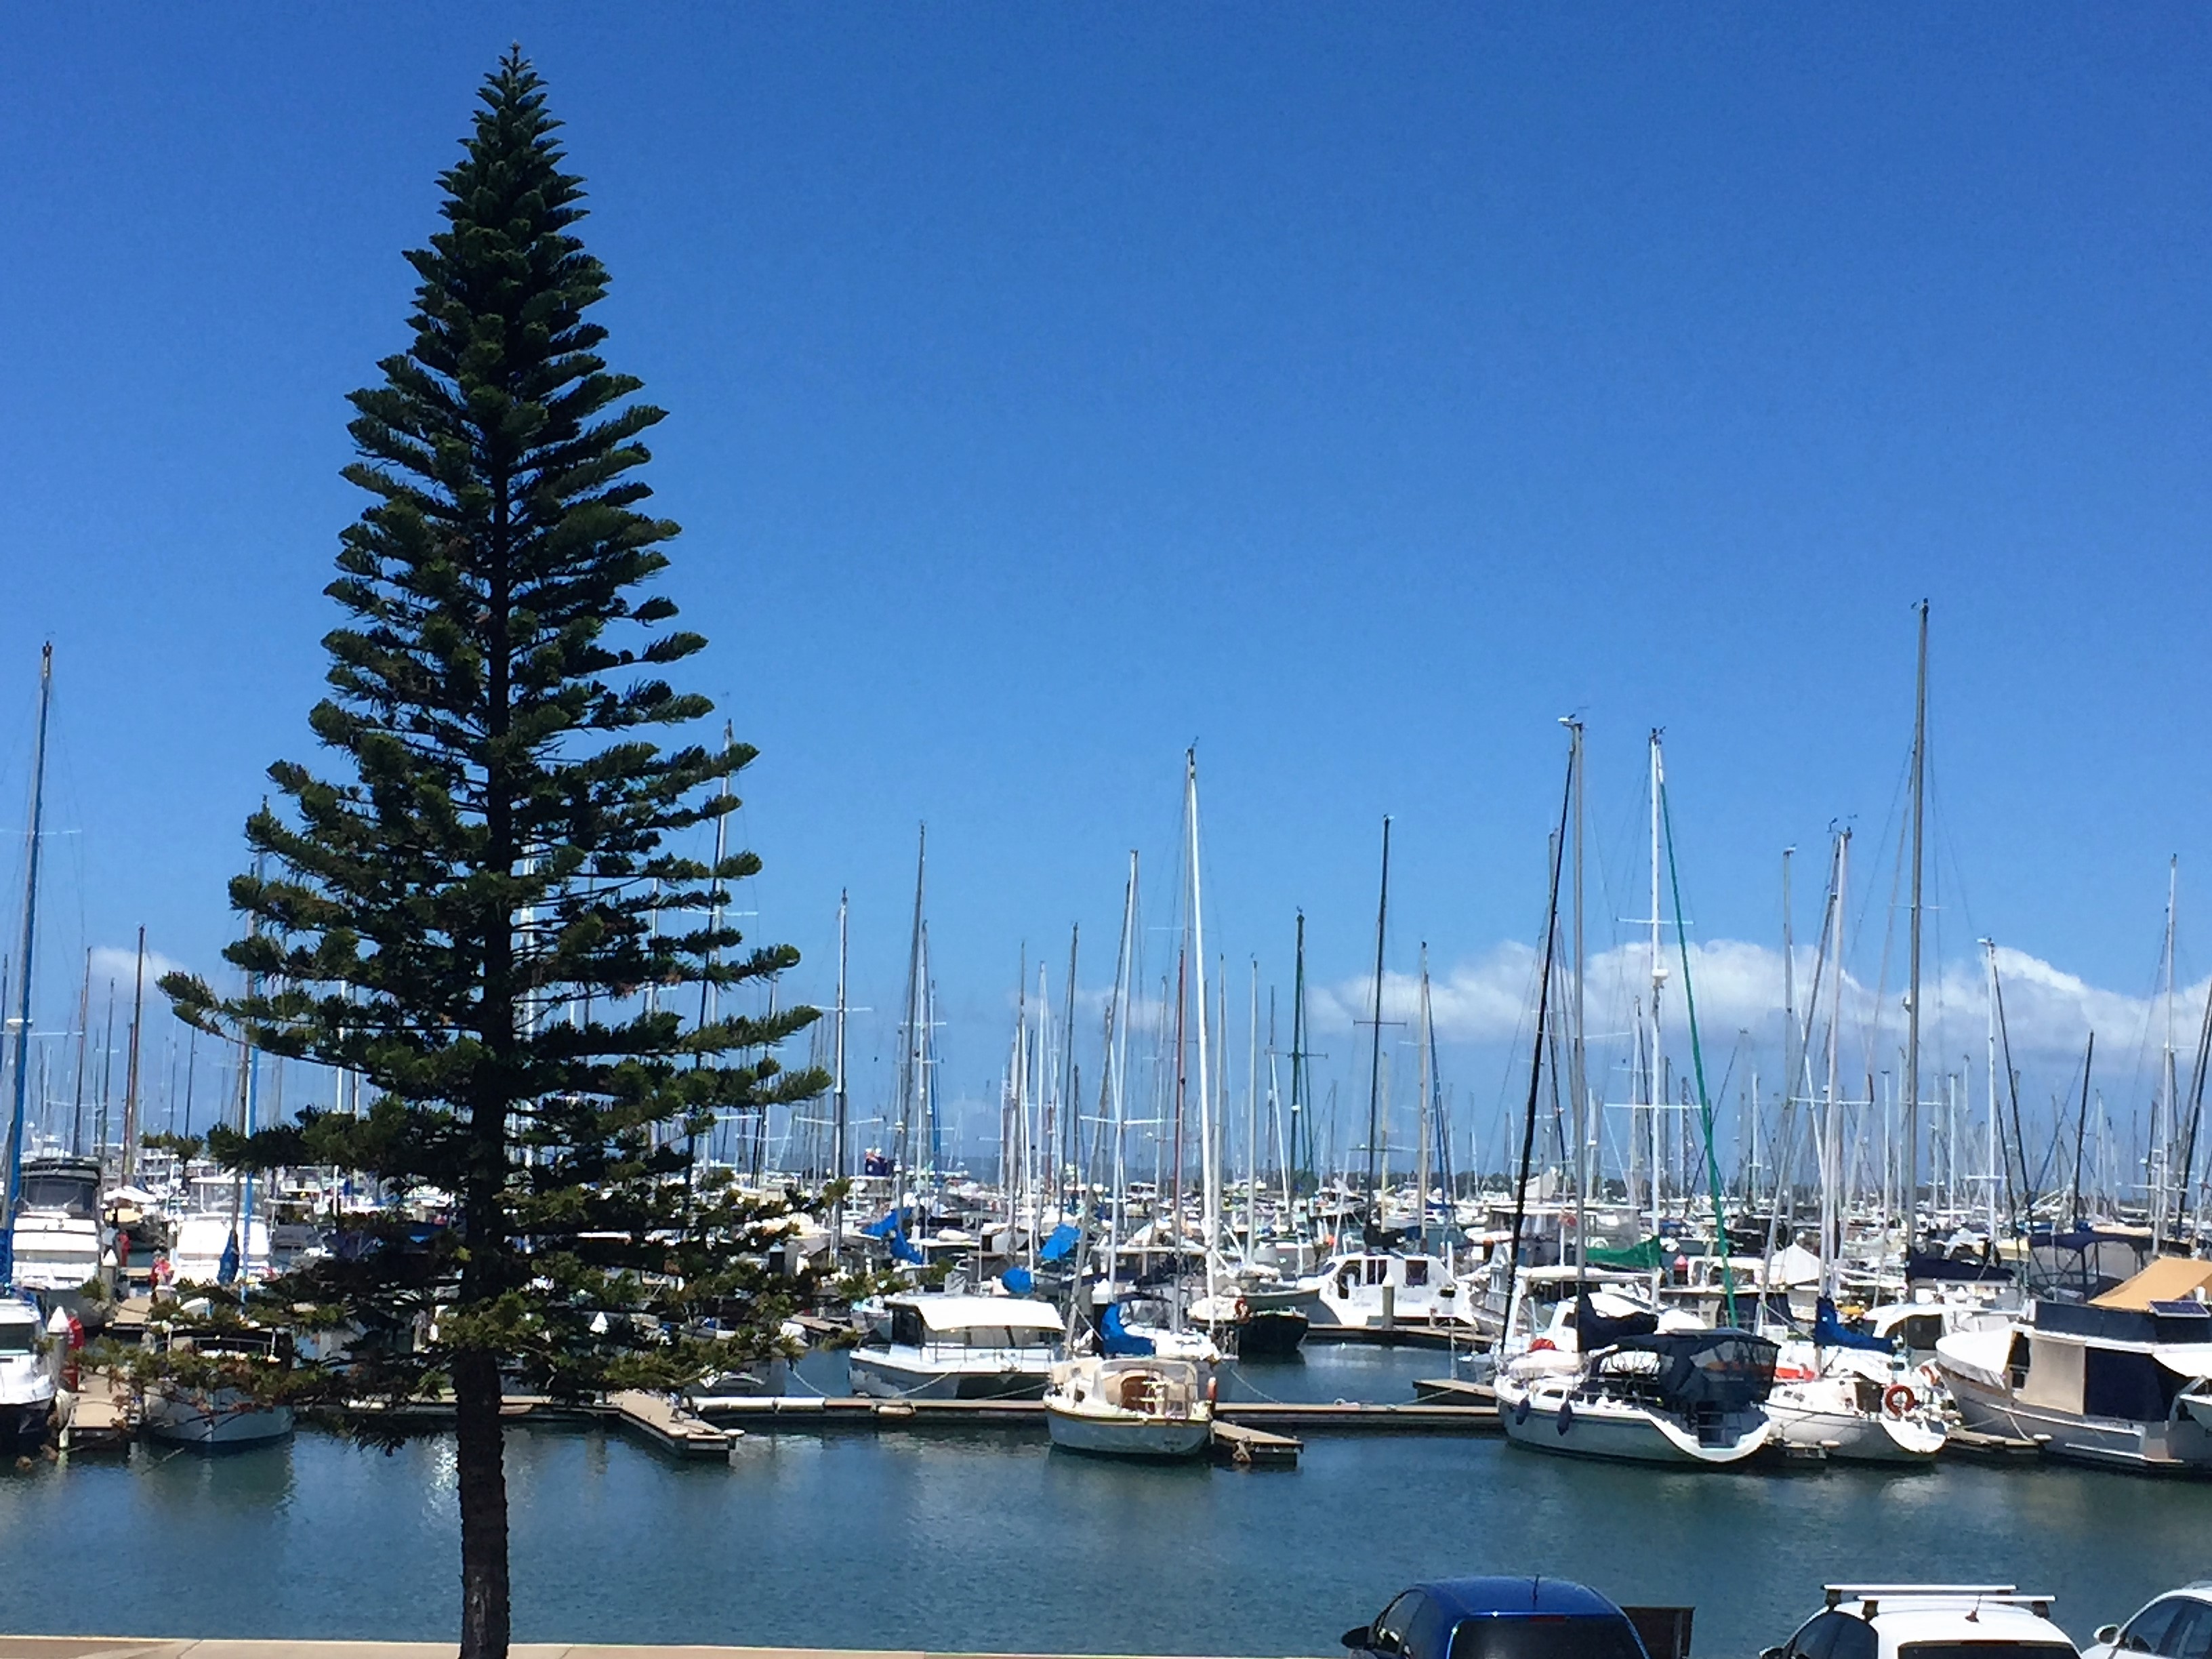 Manly, on Moreton Bay, was a great place to escape the heatwave 